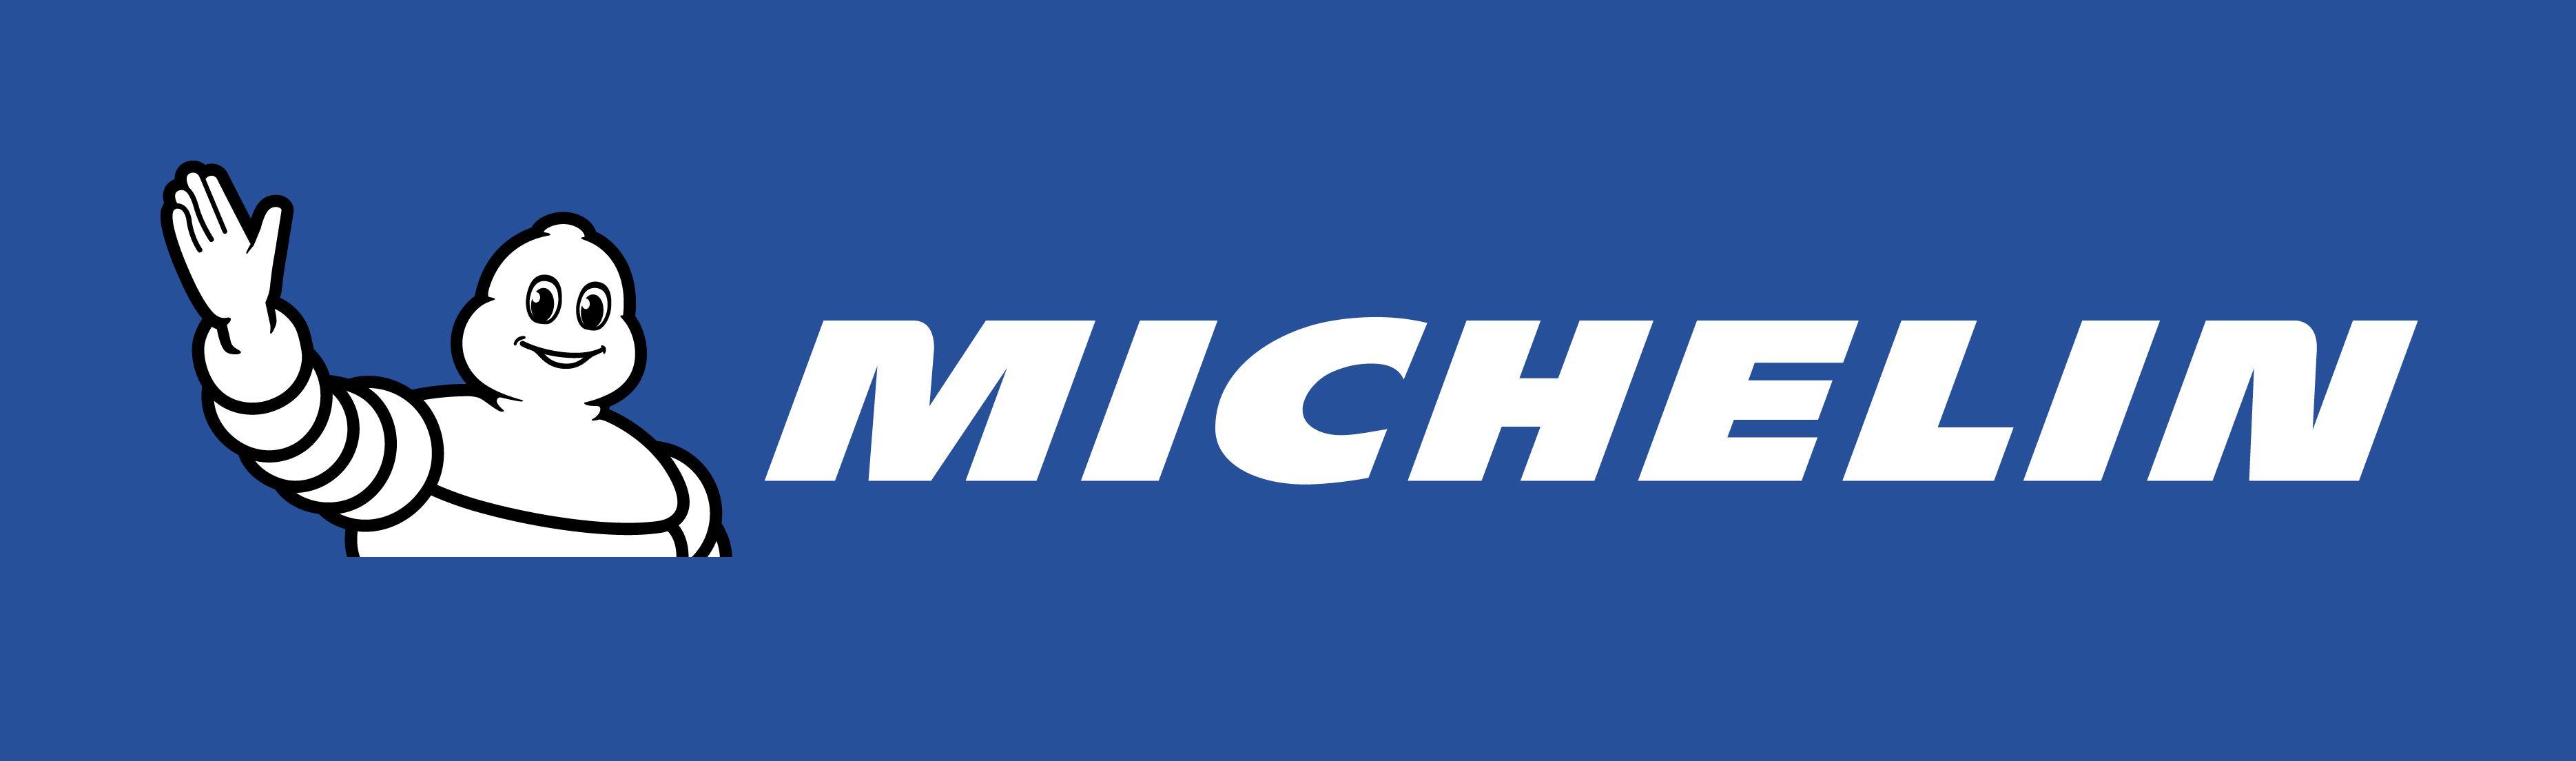 Michelin Logo - Michelin Logo, Michelin Symbol, Meaning, History and Evolution